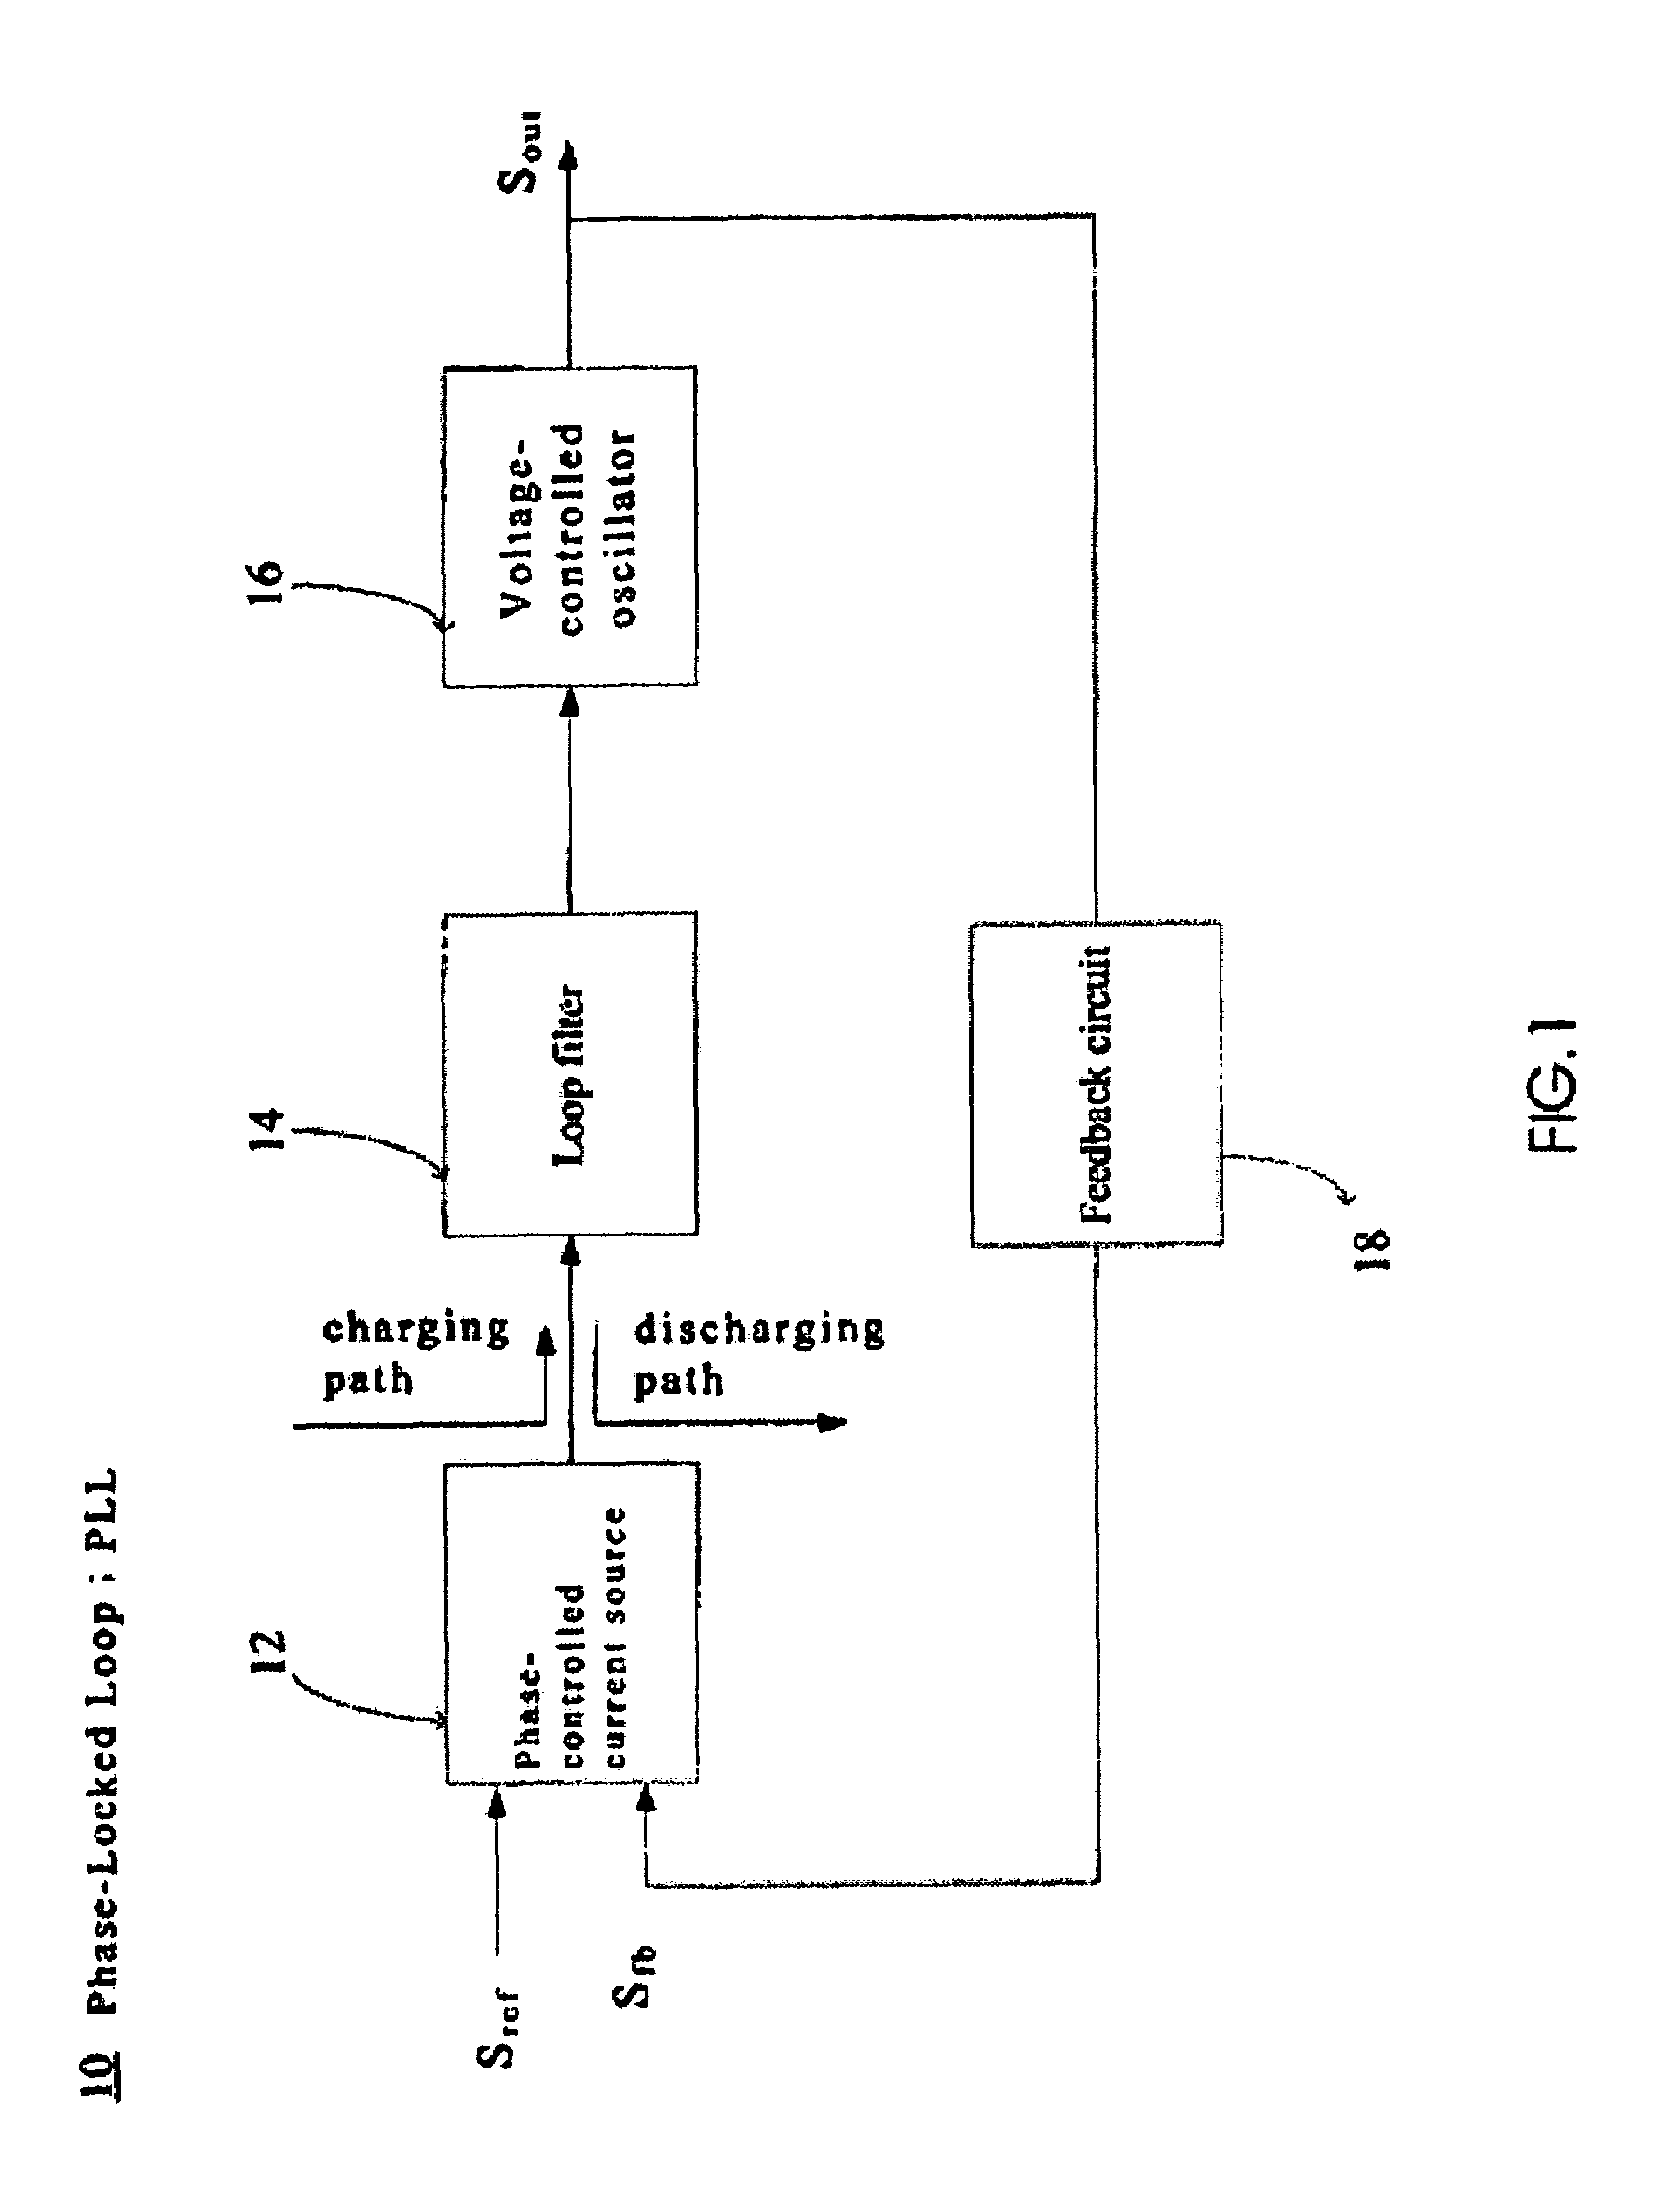 Phase-controlled current source for phase-locked loop